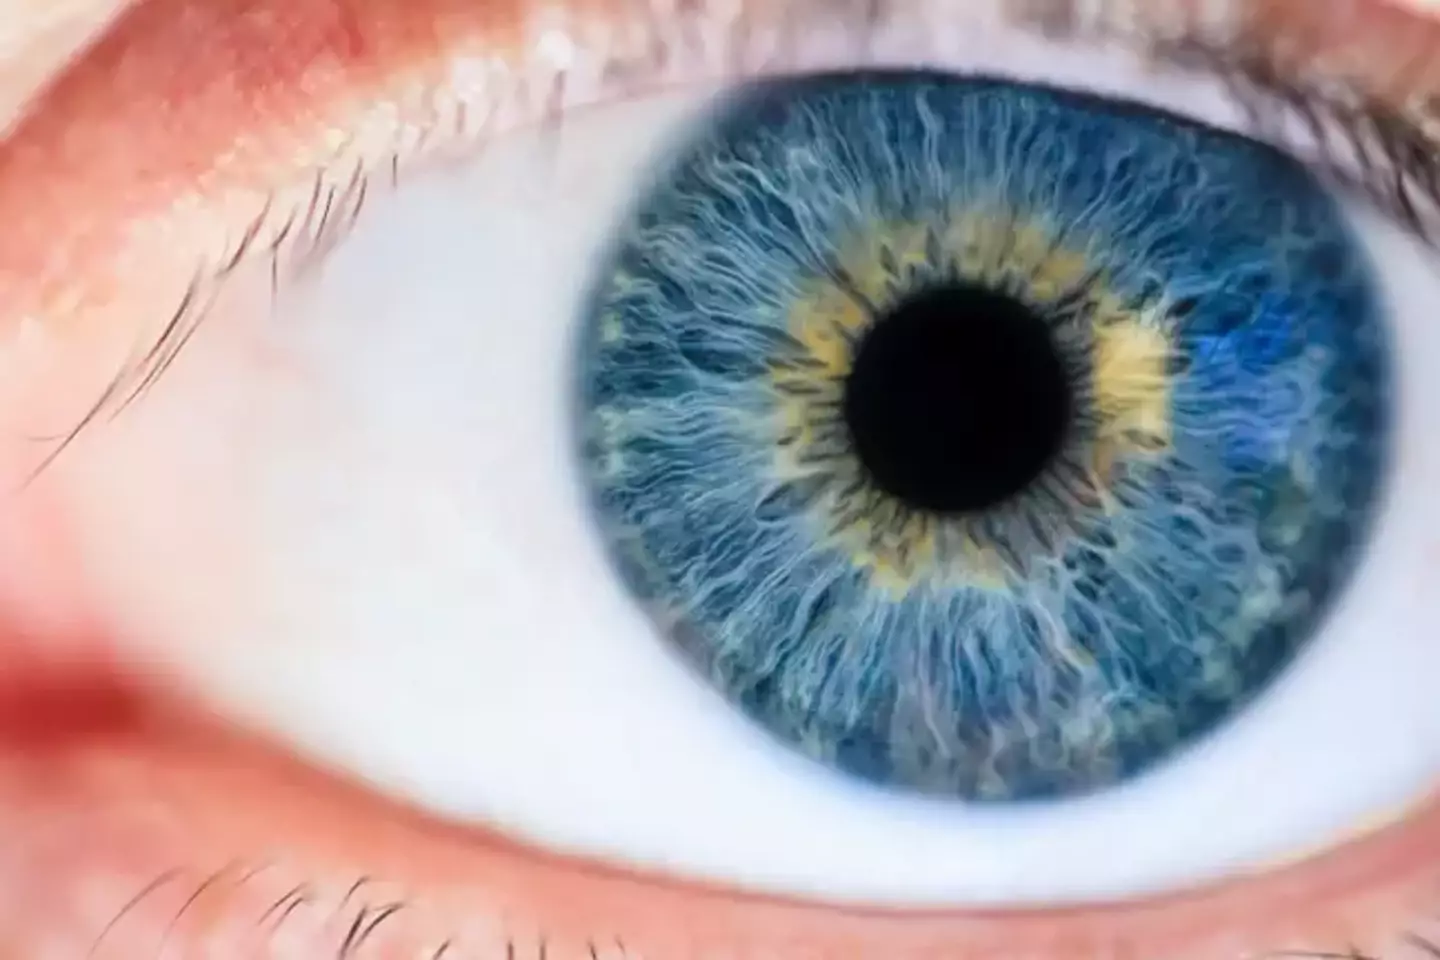 Someone living thousands of years ago was the first blue-eyed human, now there are hundreds of millions of them.